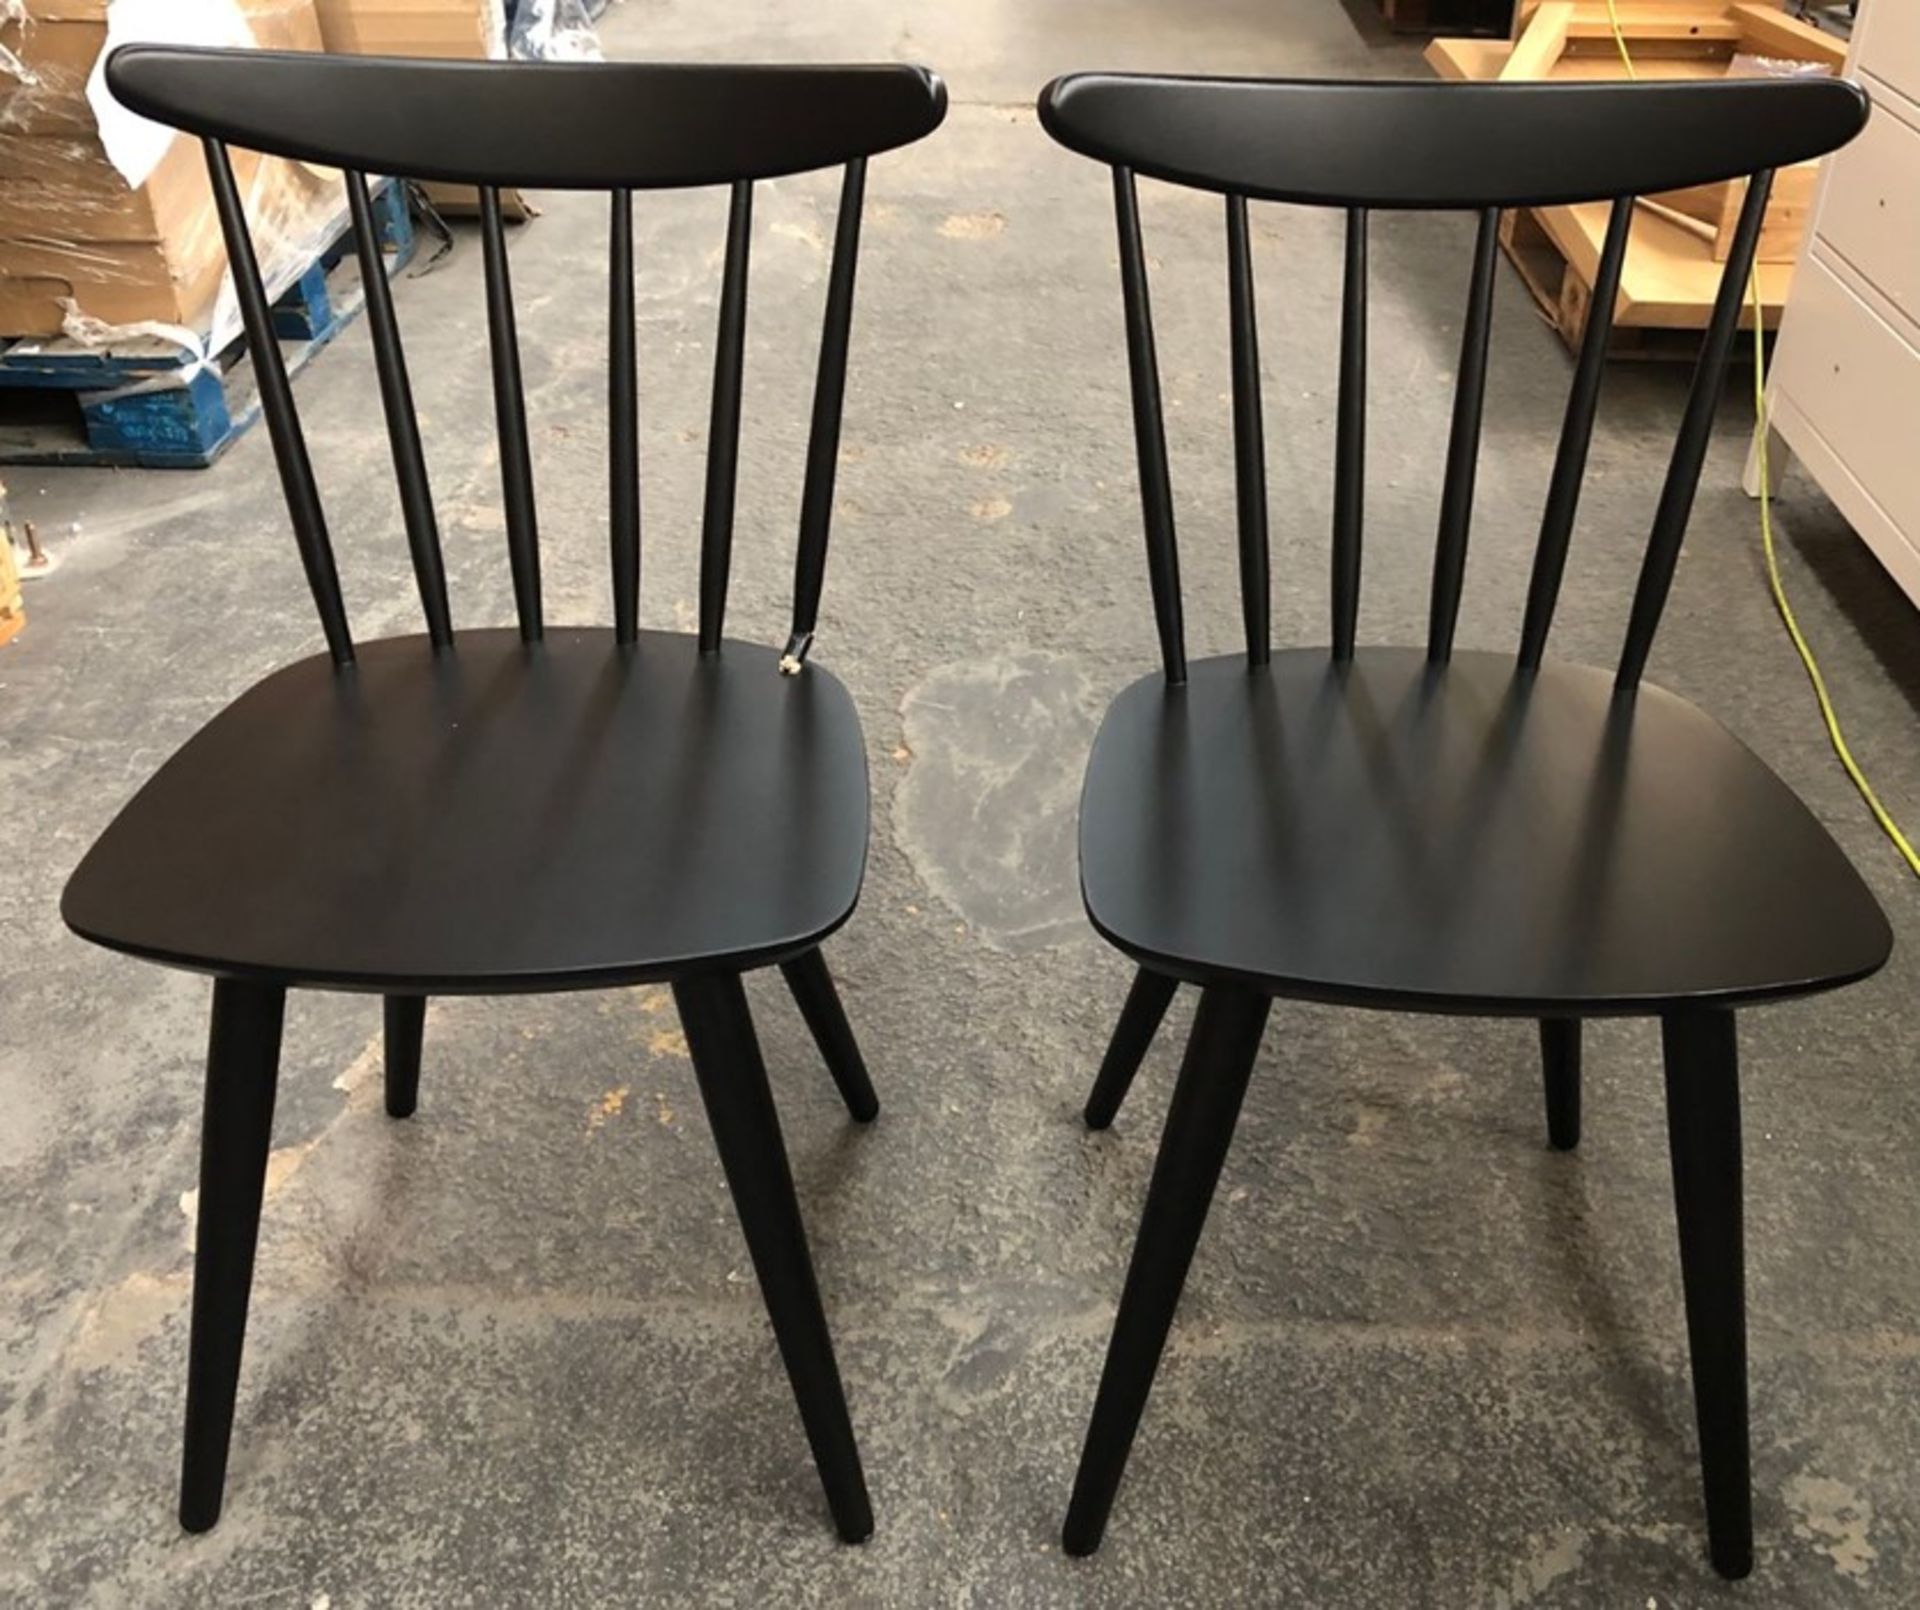 2 x JOHN LEWIS SPINDLE DINING CHAIRS